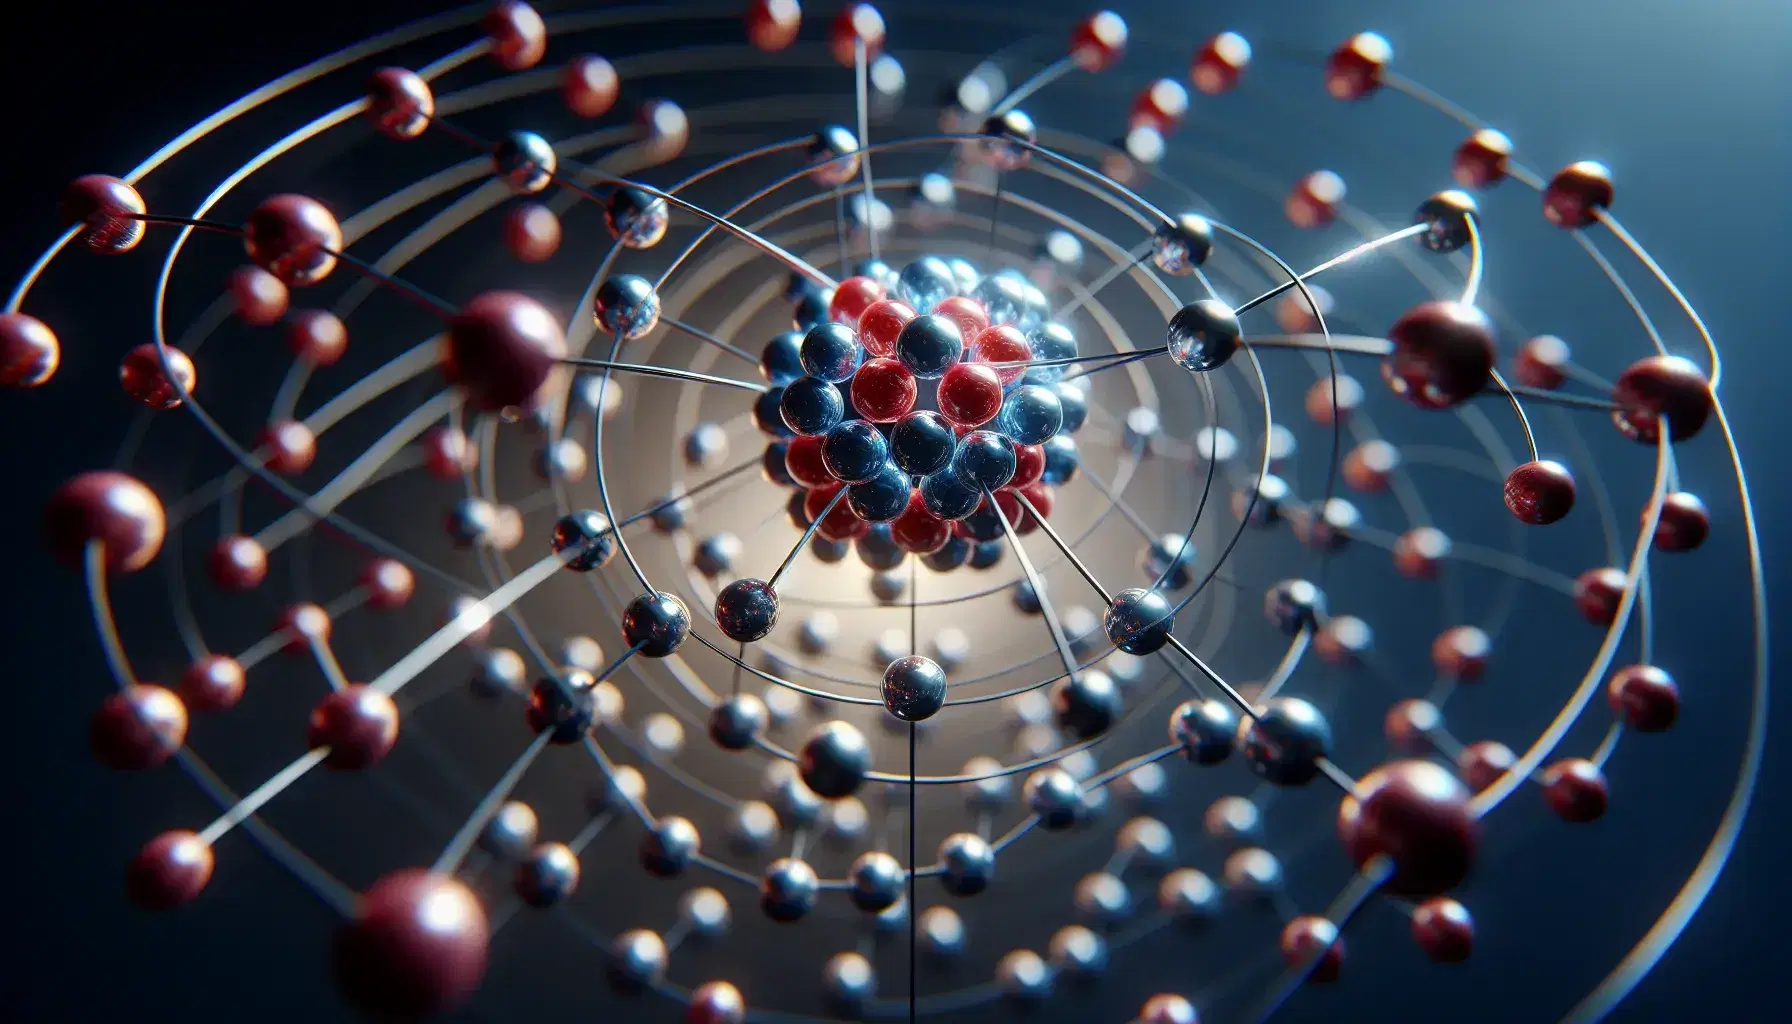 Three-dimensional model of an atom with a nucleus of red and blue spheres for protons and neutrons and silver electron orbits on a blue gradient background.